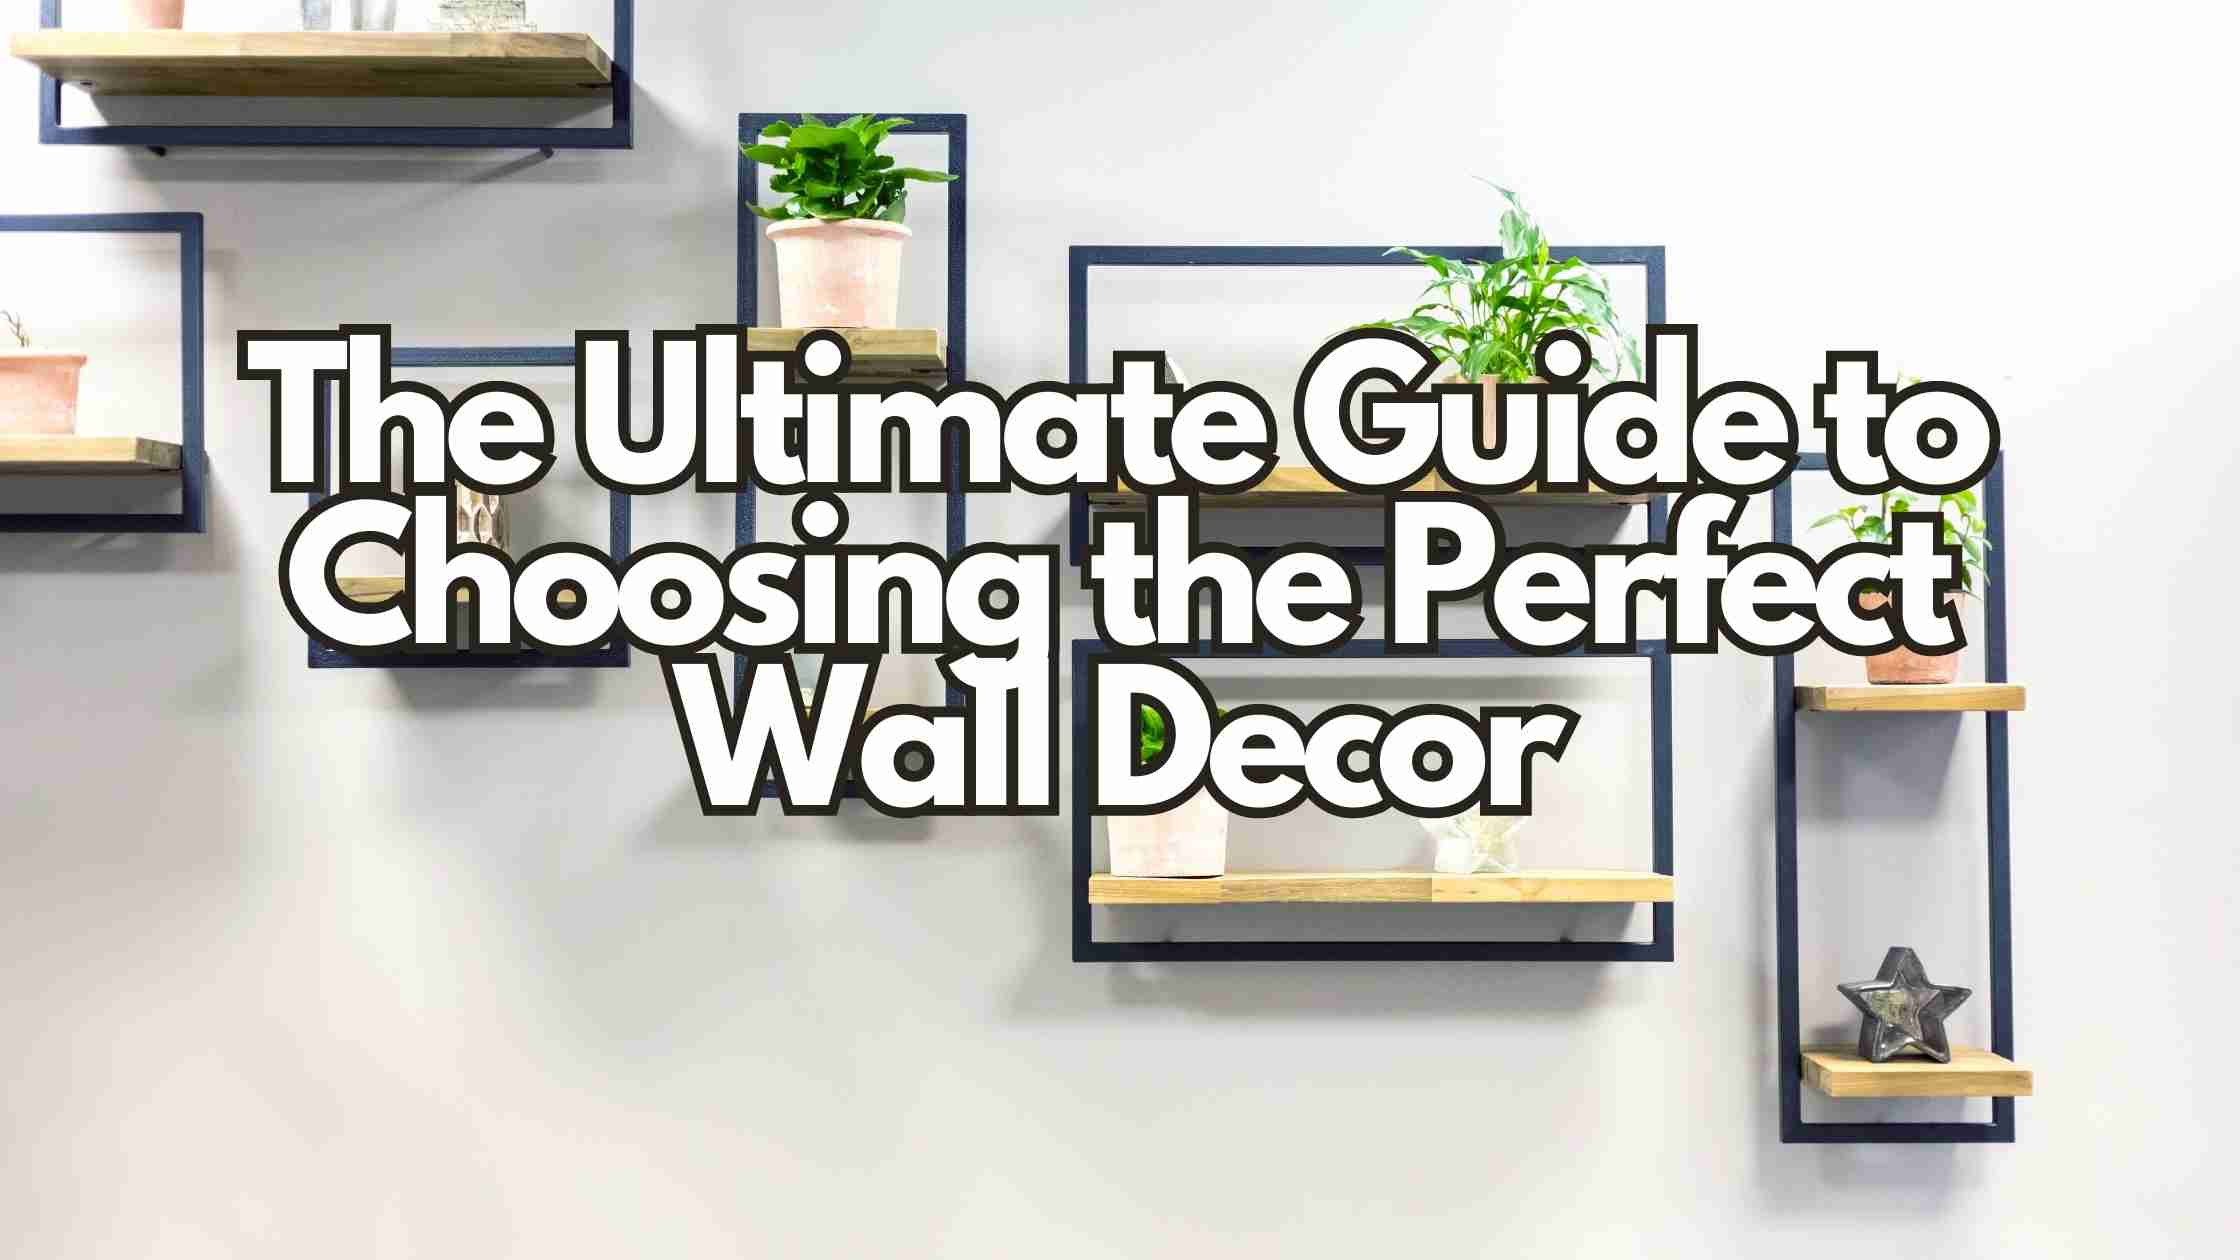 The Ultimate Guide to Choosing the Perfect Wall Decor